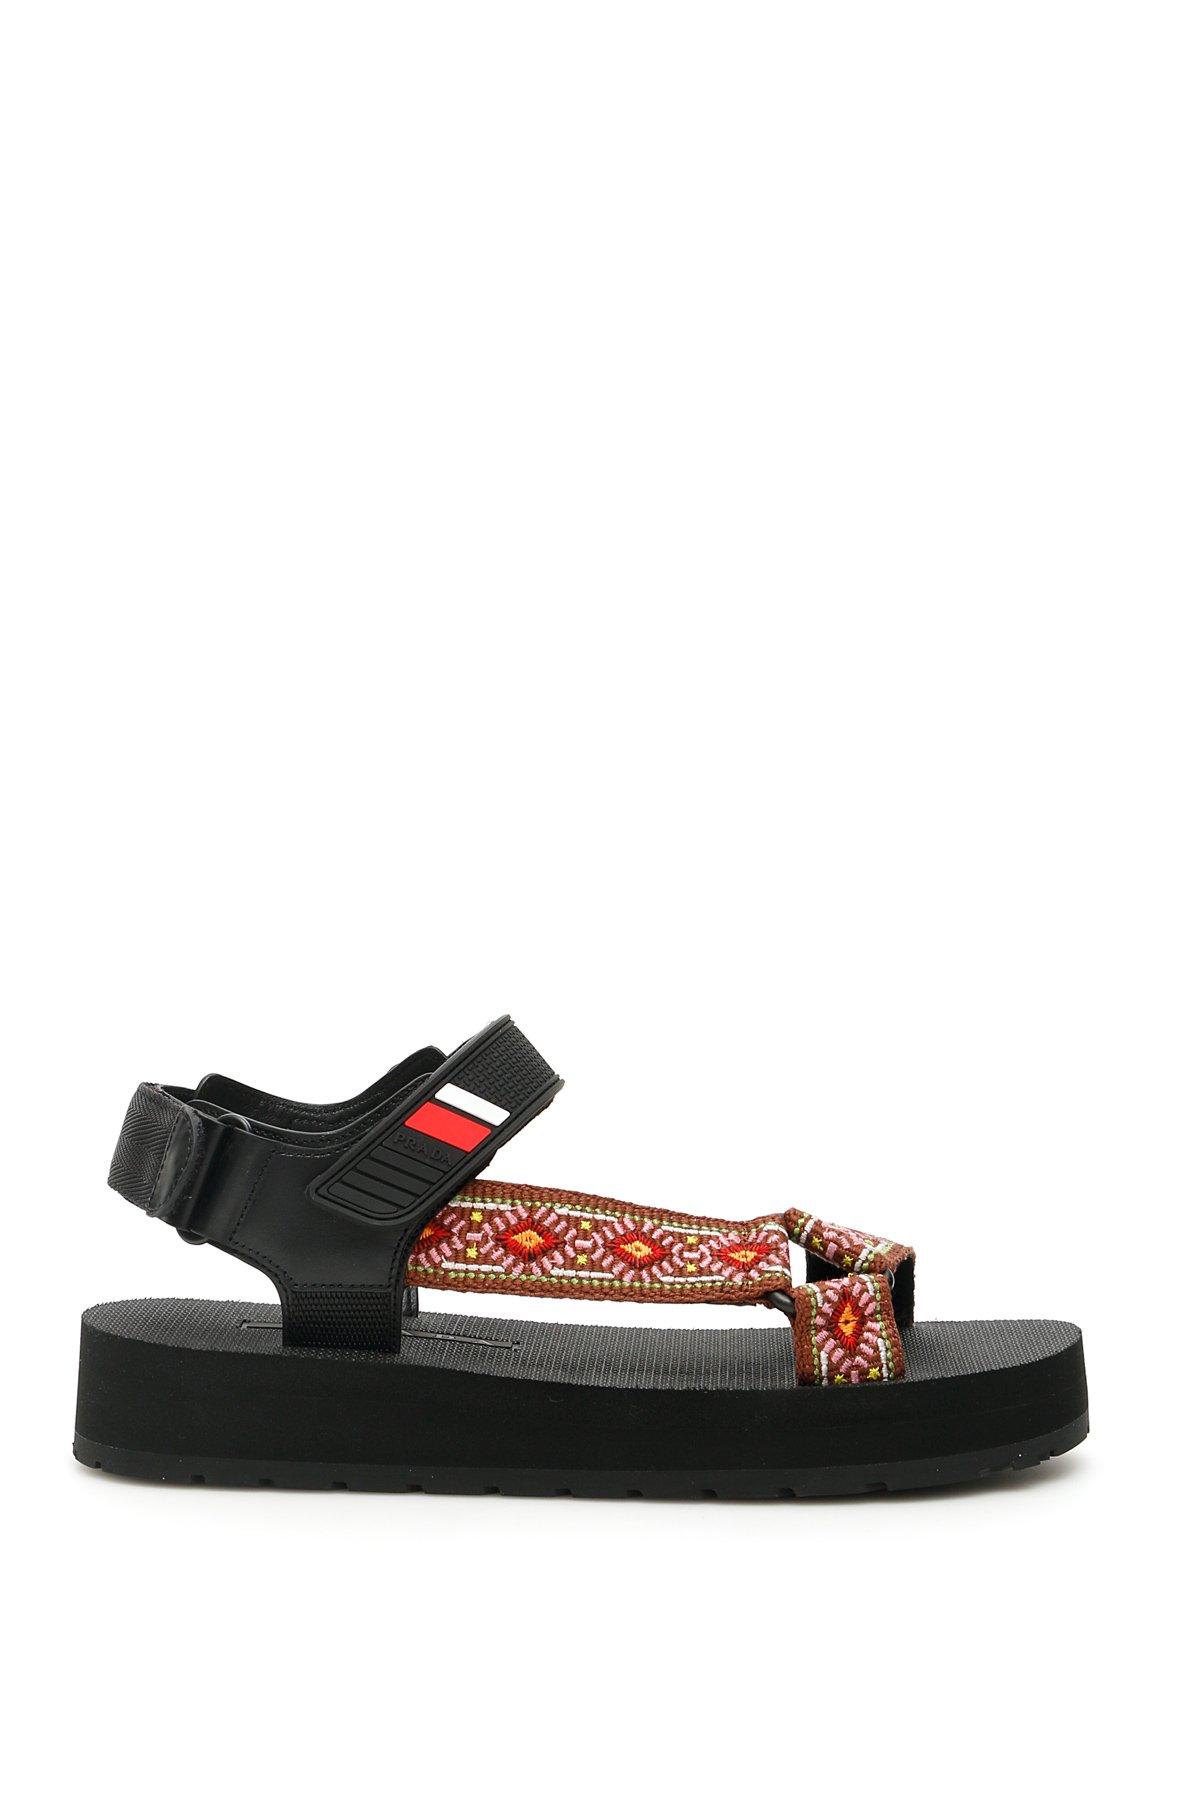 Prada Leather Embroidered Straps Sandals in Black - Save 13% - Lyst